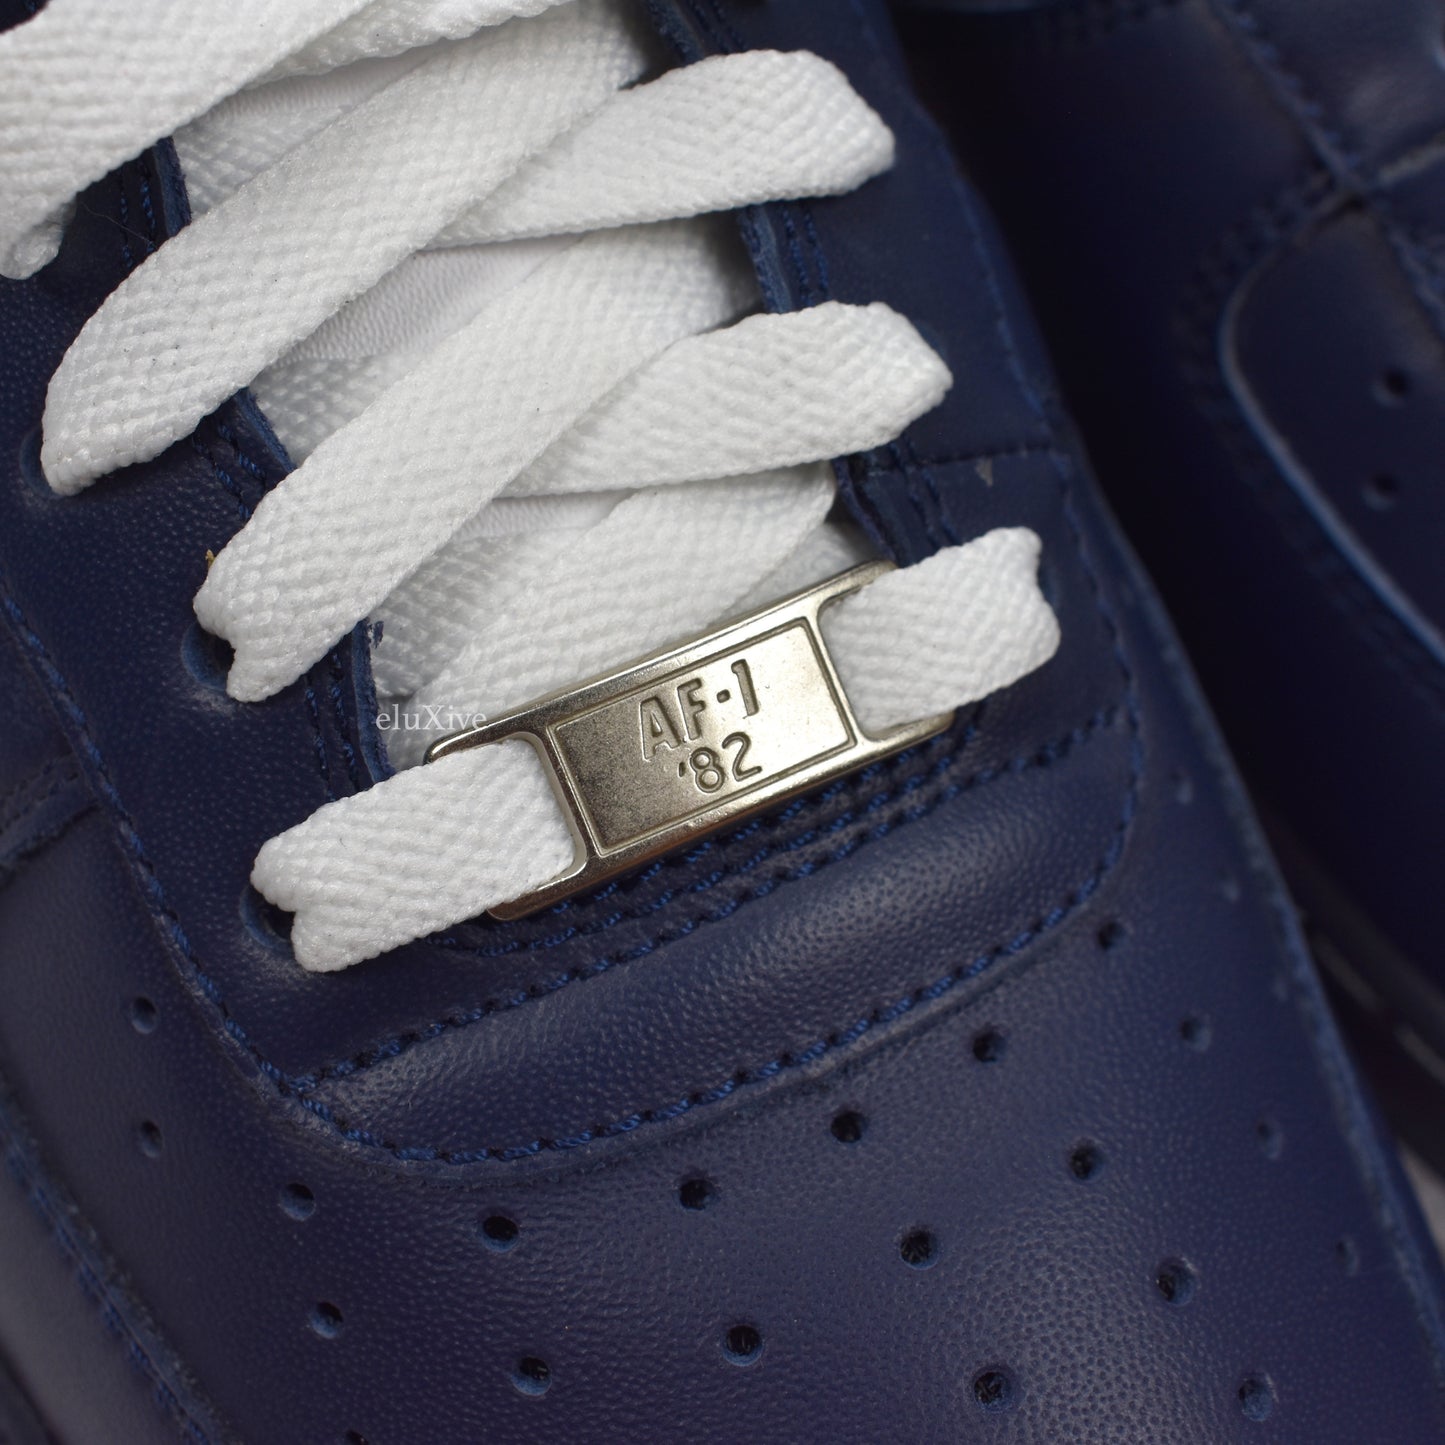 Nike - Air Force 1 '07 Low 'Blueprint' (Obsidian/White)